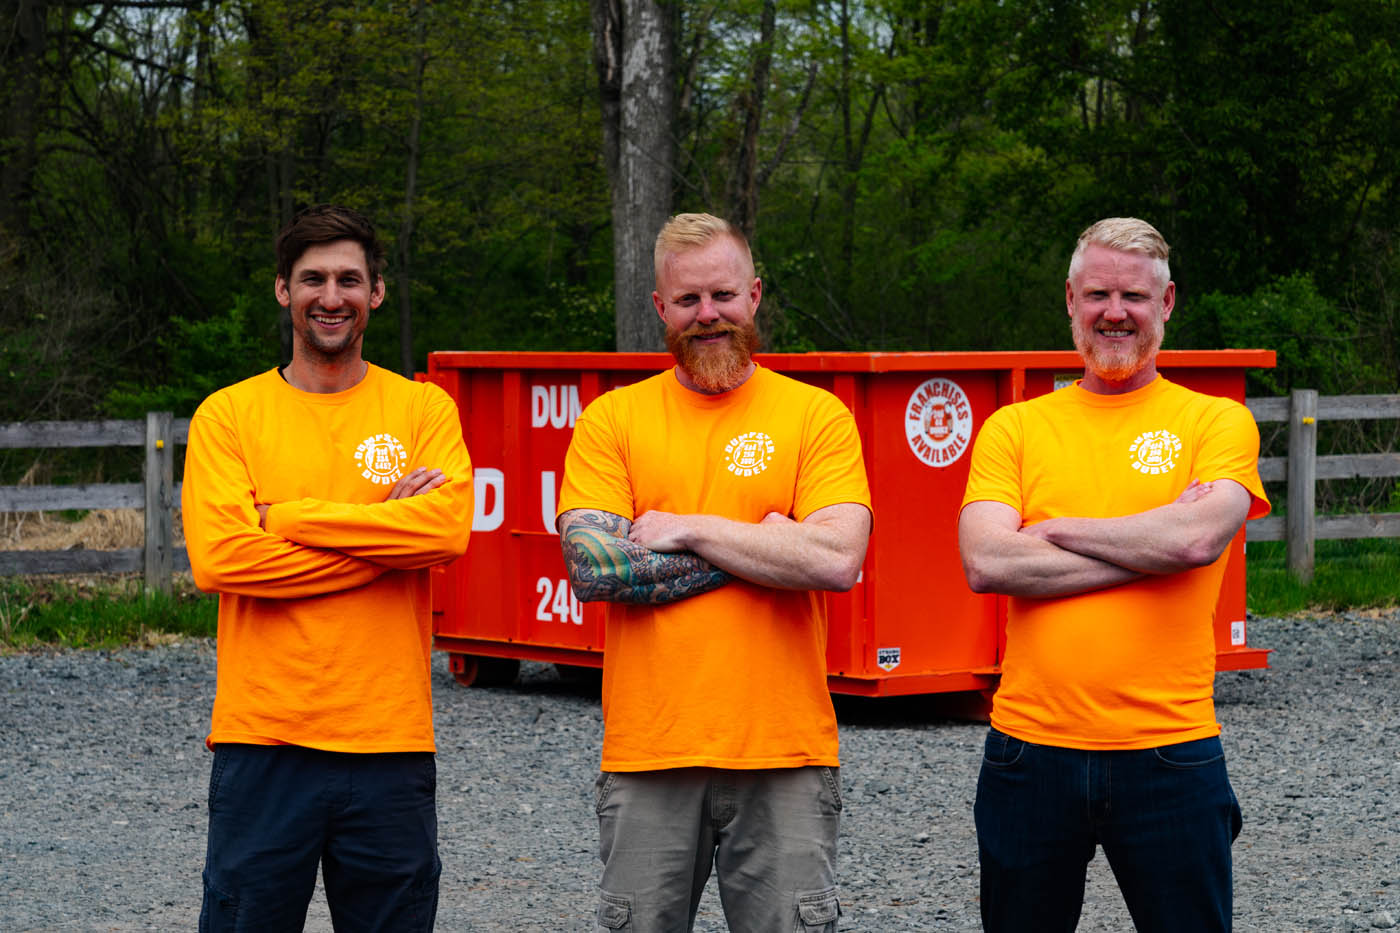 The Dumpster Dudez team - learn why local dumpster rental is such a great choice for the community!